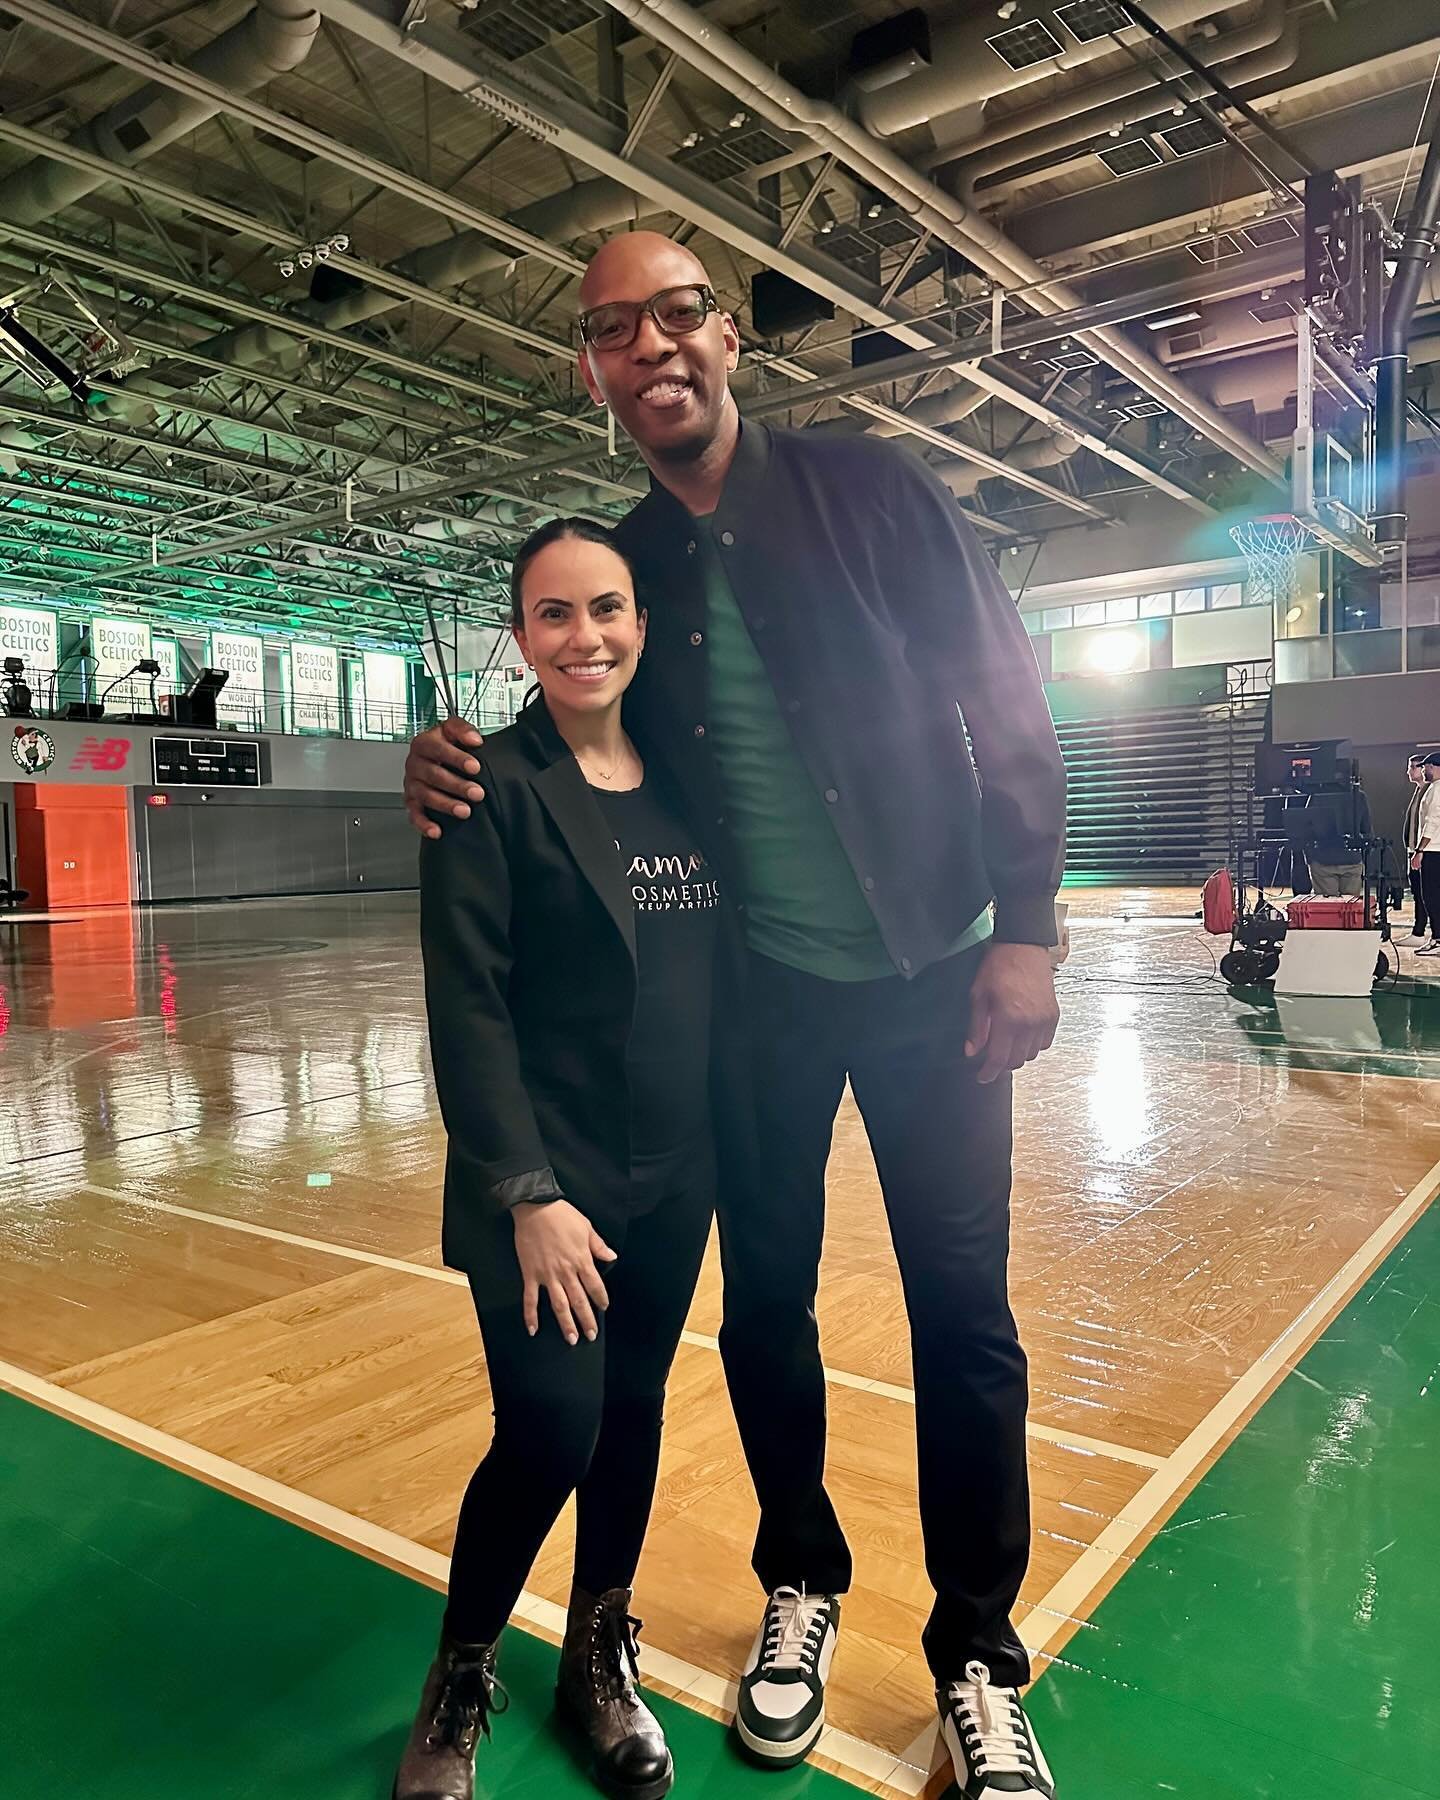 SAM CASSELL X ZENNI 

Who saw the @zennioptical commercial during the @celtics games!!! 🍀 Honored to have been part of this amazing team! Four weeks post partum but we made it happen! 🙌More to come!!

boston makeup artist, commercial makeup service